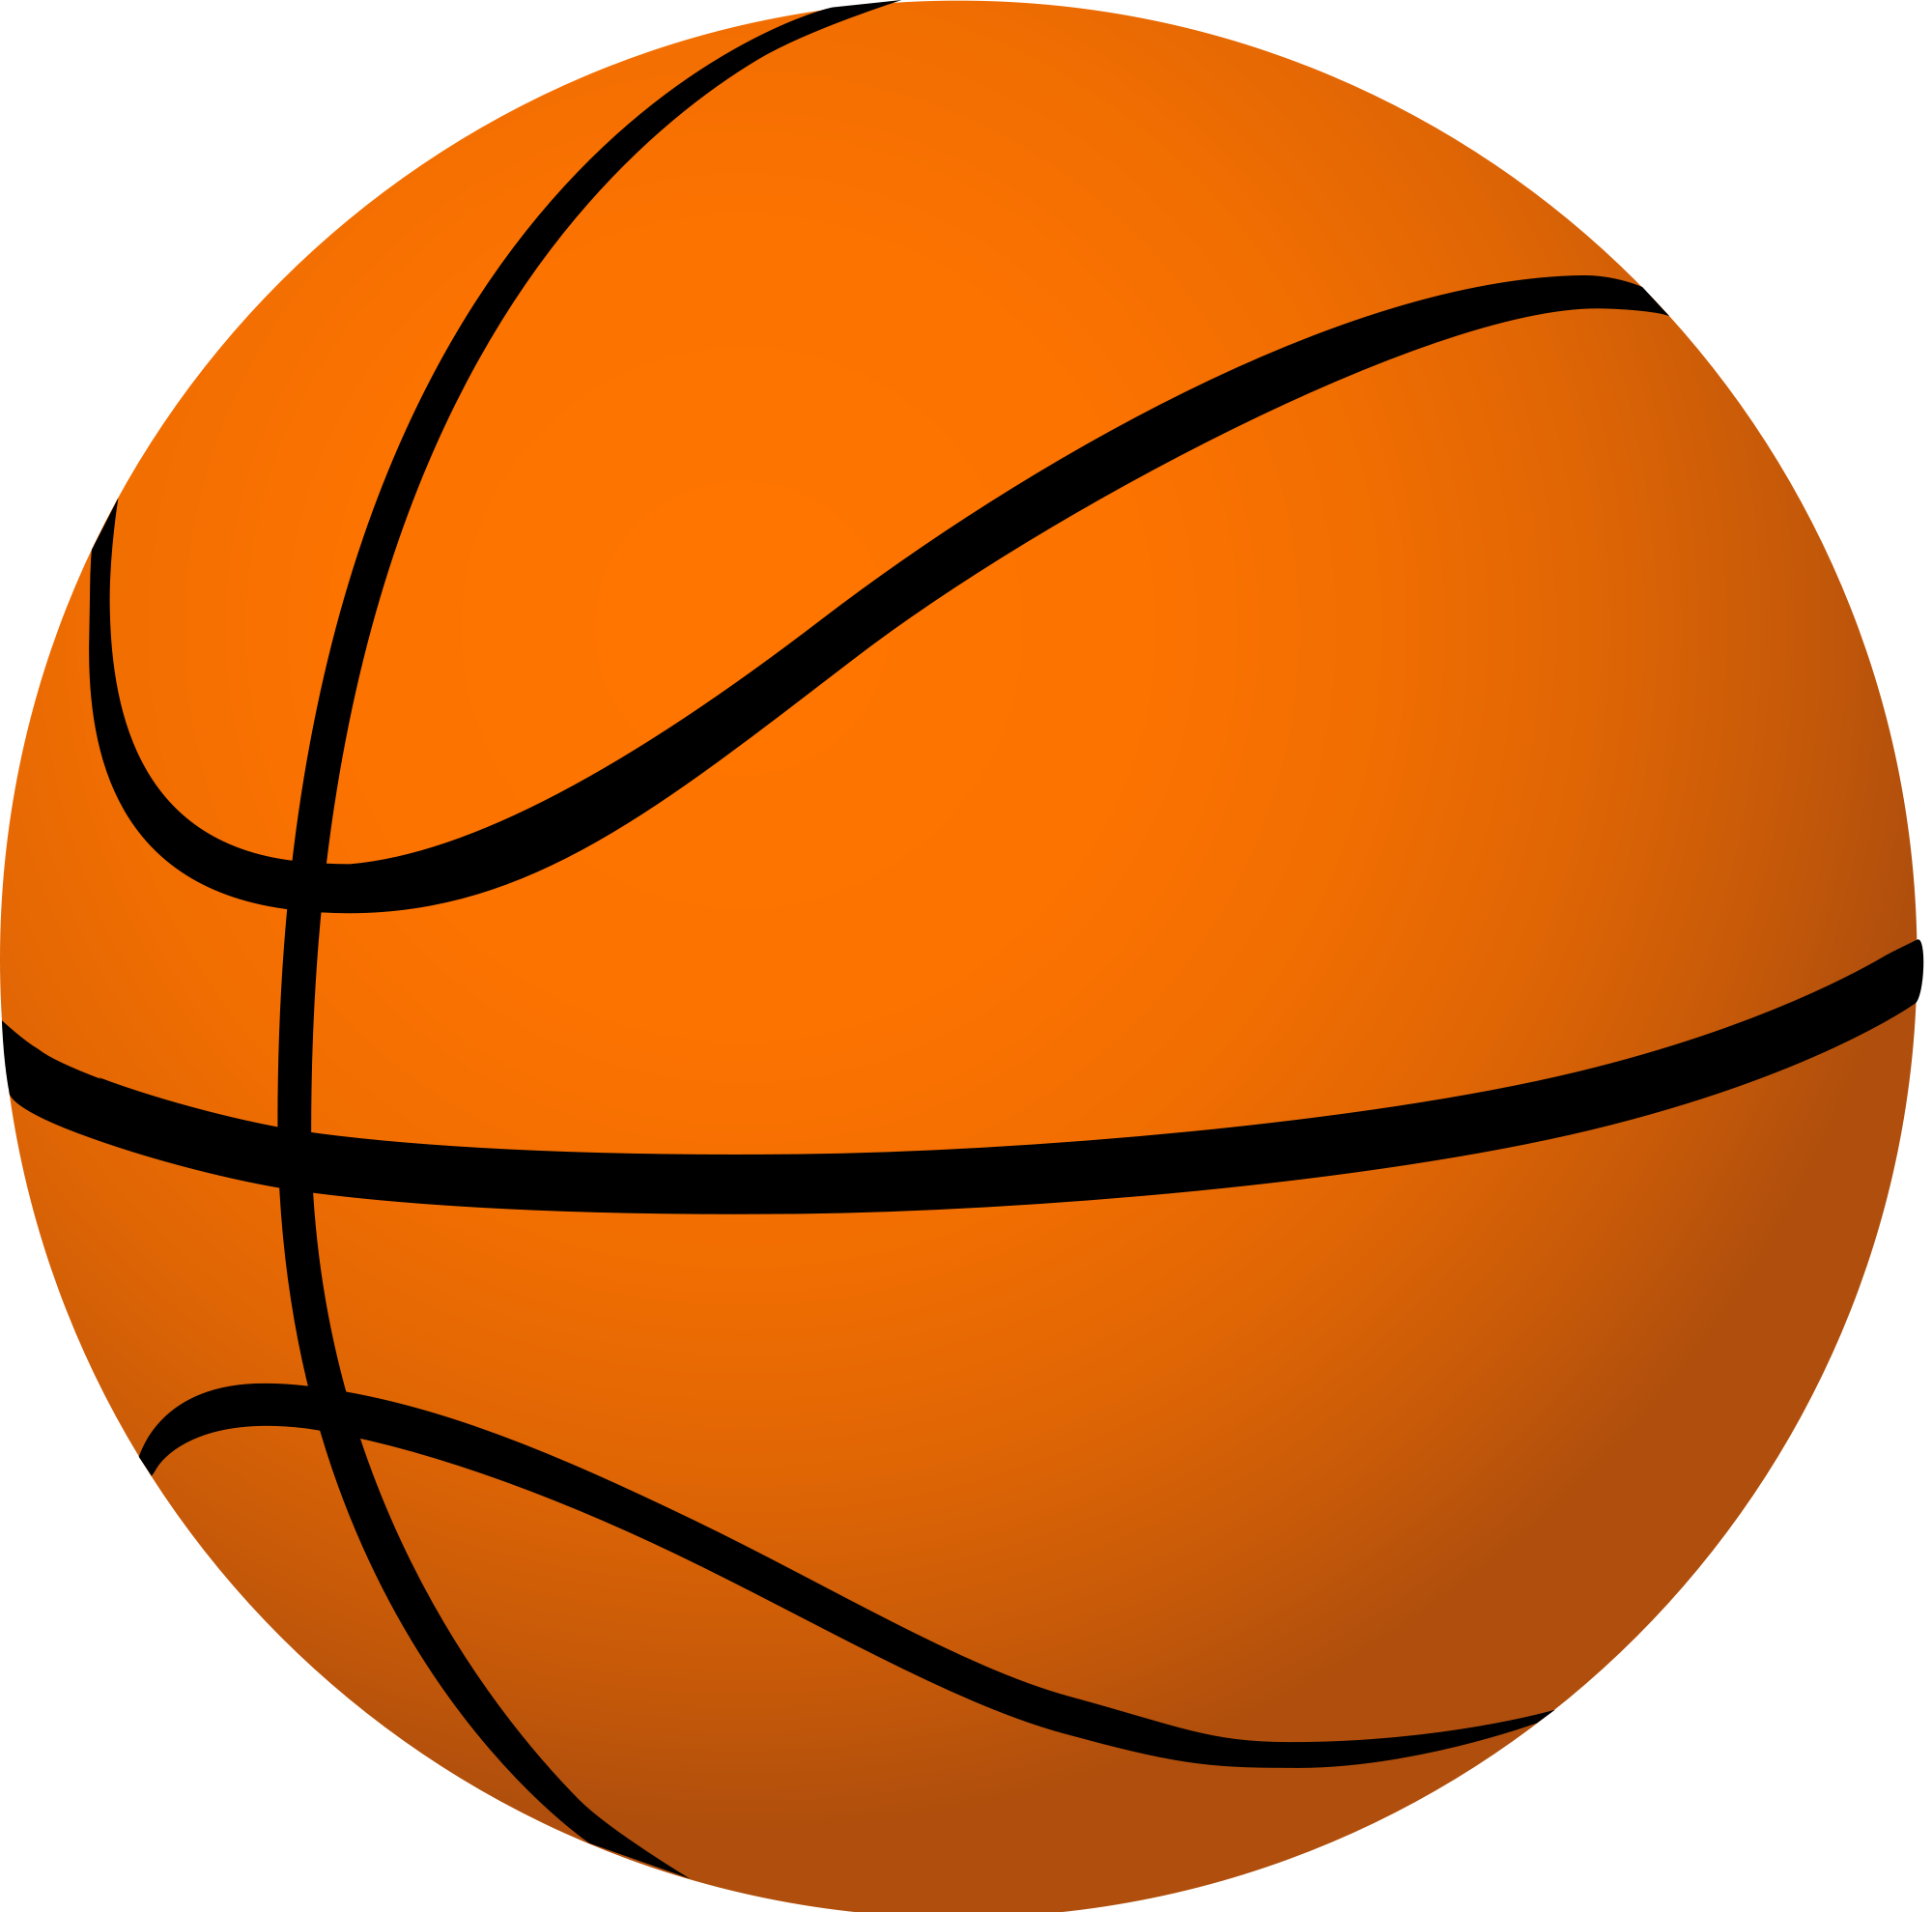 Basketball clipart free .